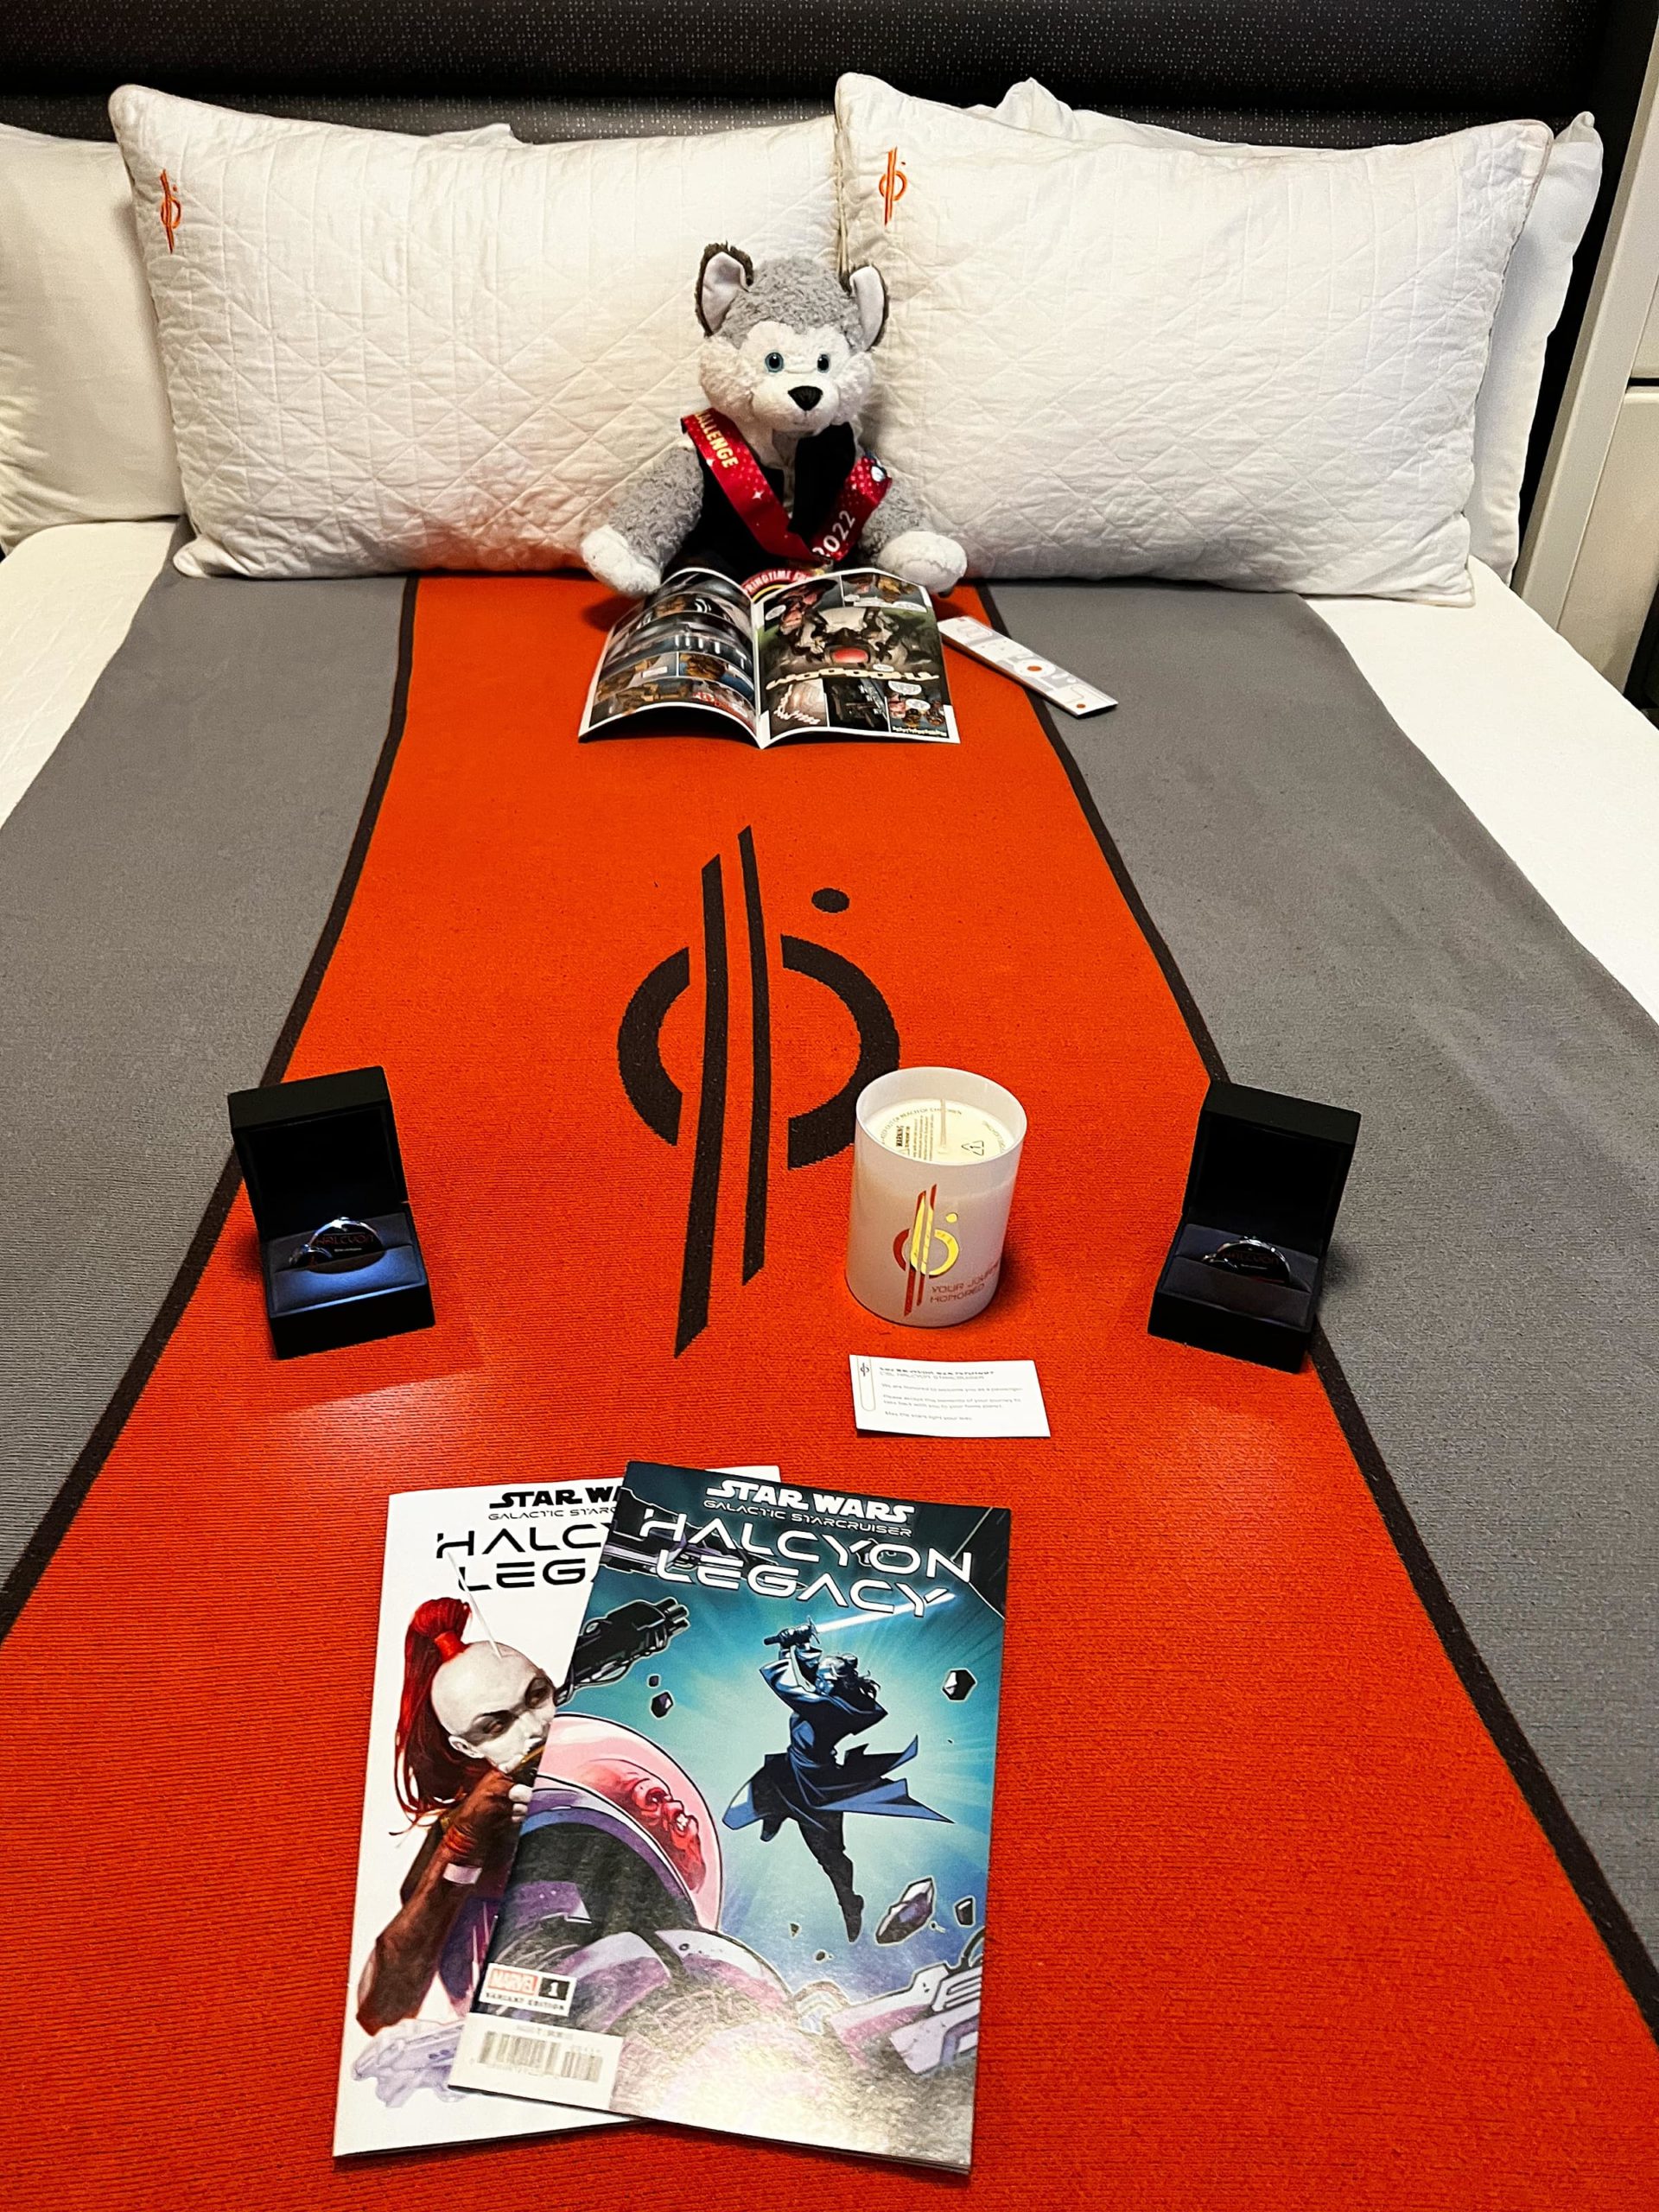 Little gifts left on our bed during our trip on the Star Wars Hotel Galactic Starcruiser